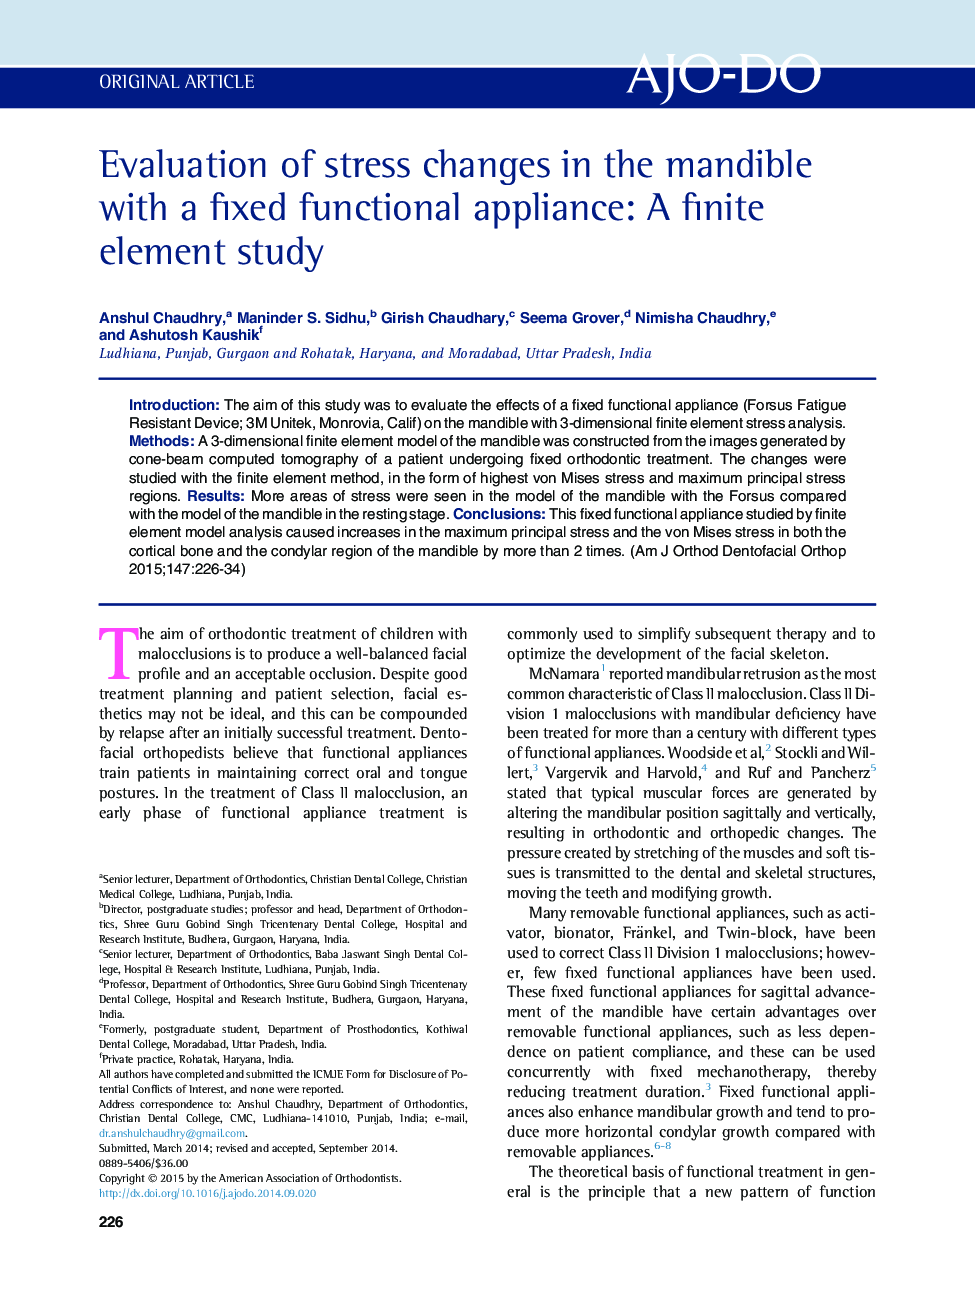 Evaluation of stress changes in the mandible with a fixed functional appliance: A finite element study 